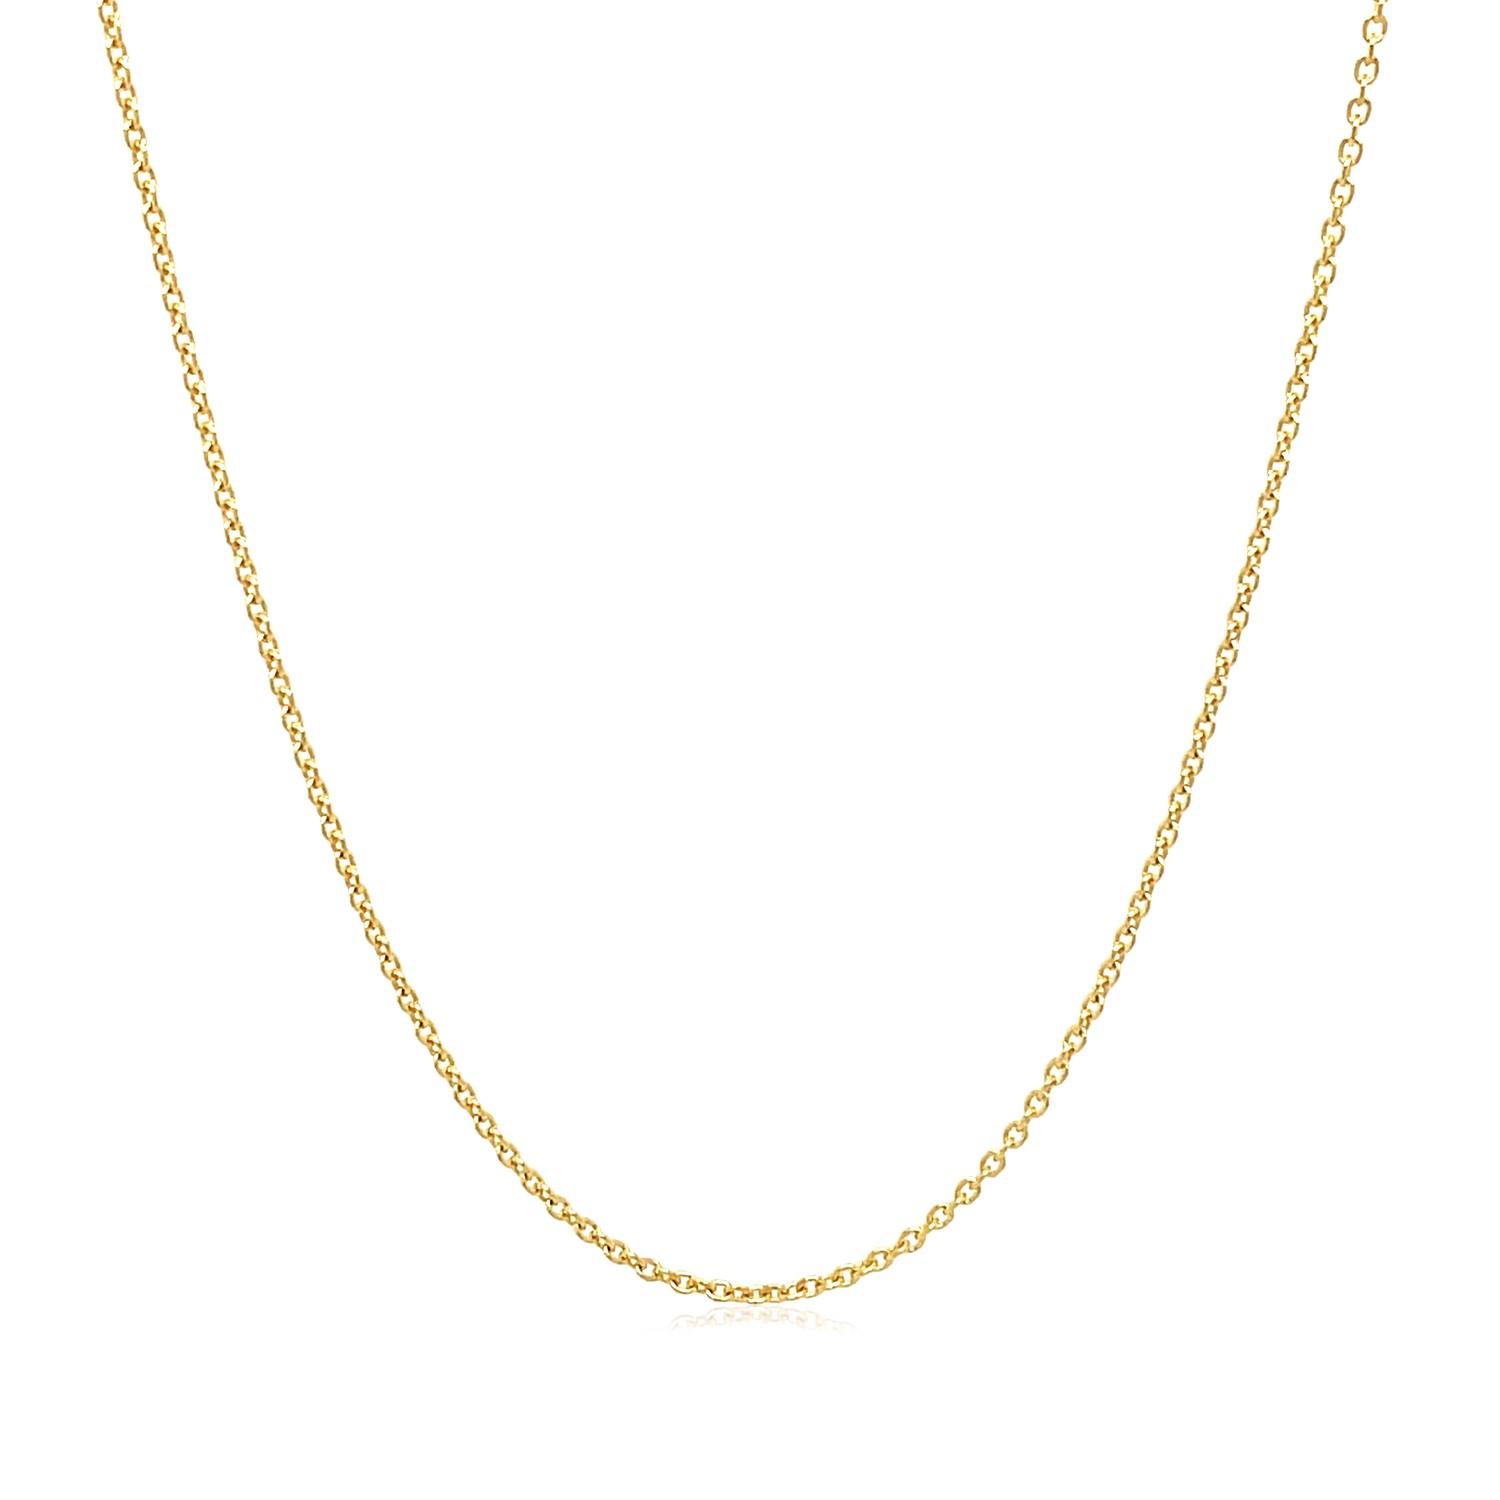 14k Yellow Gold Round Cable Link Chain 1.1mm Size 18 inches - image 2 of 4